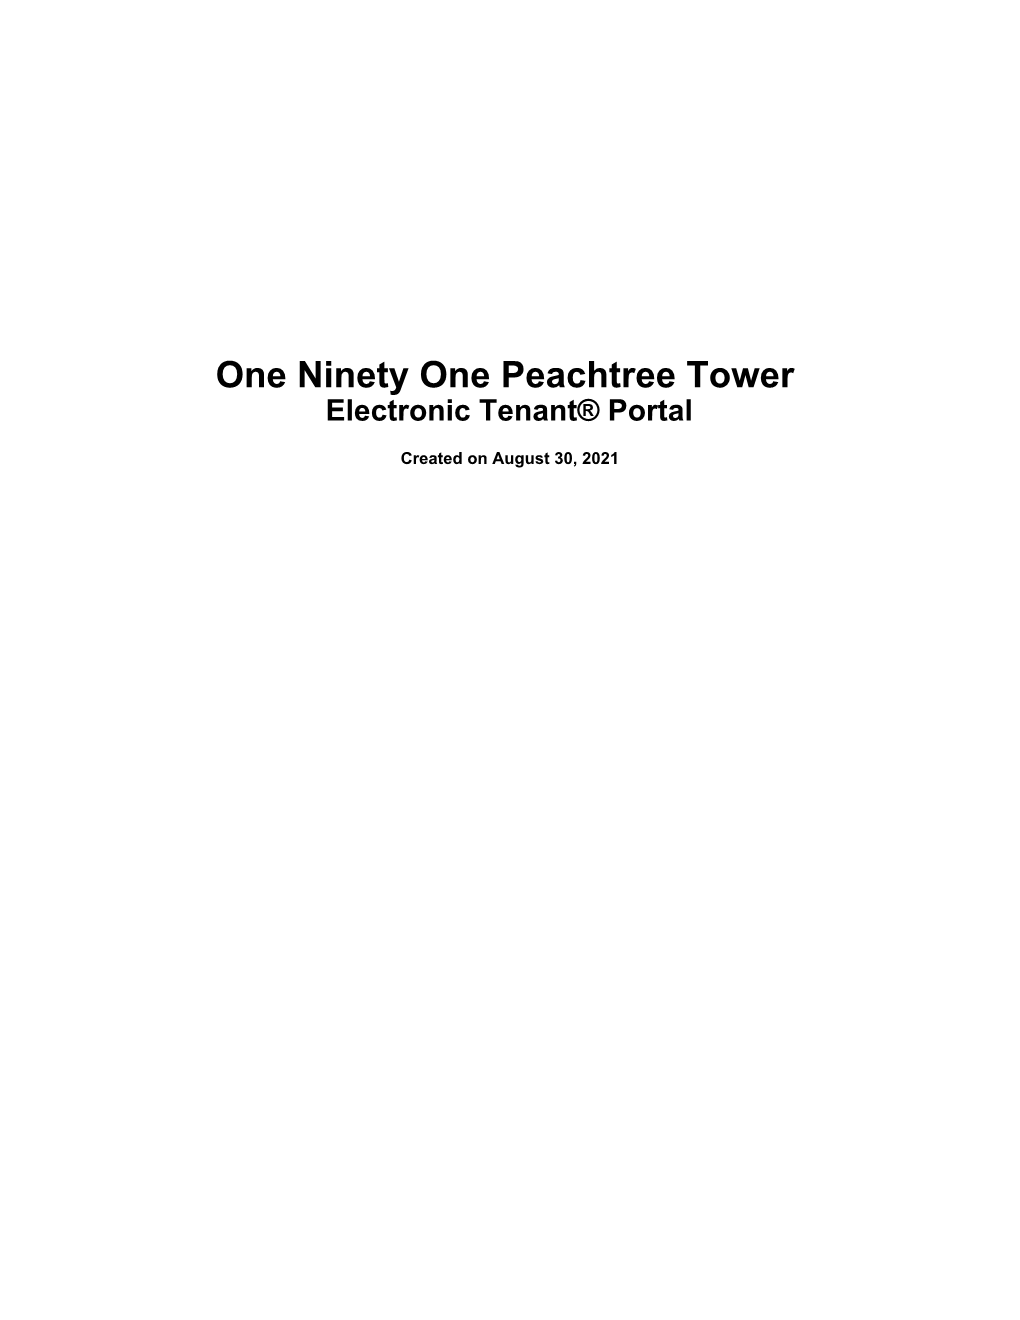 One Ninety One Peachtree Tower Electronic Tenant® Portal